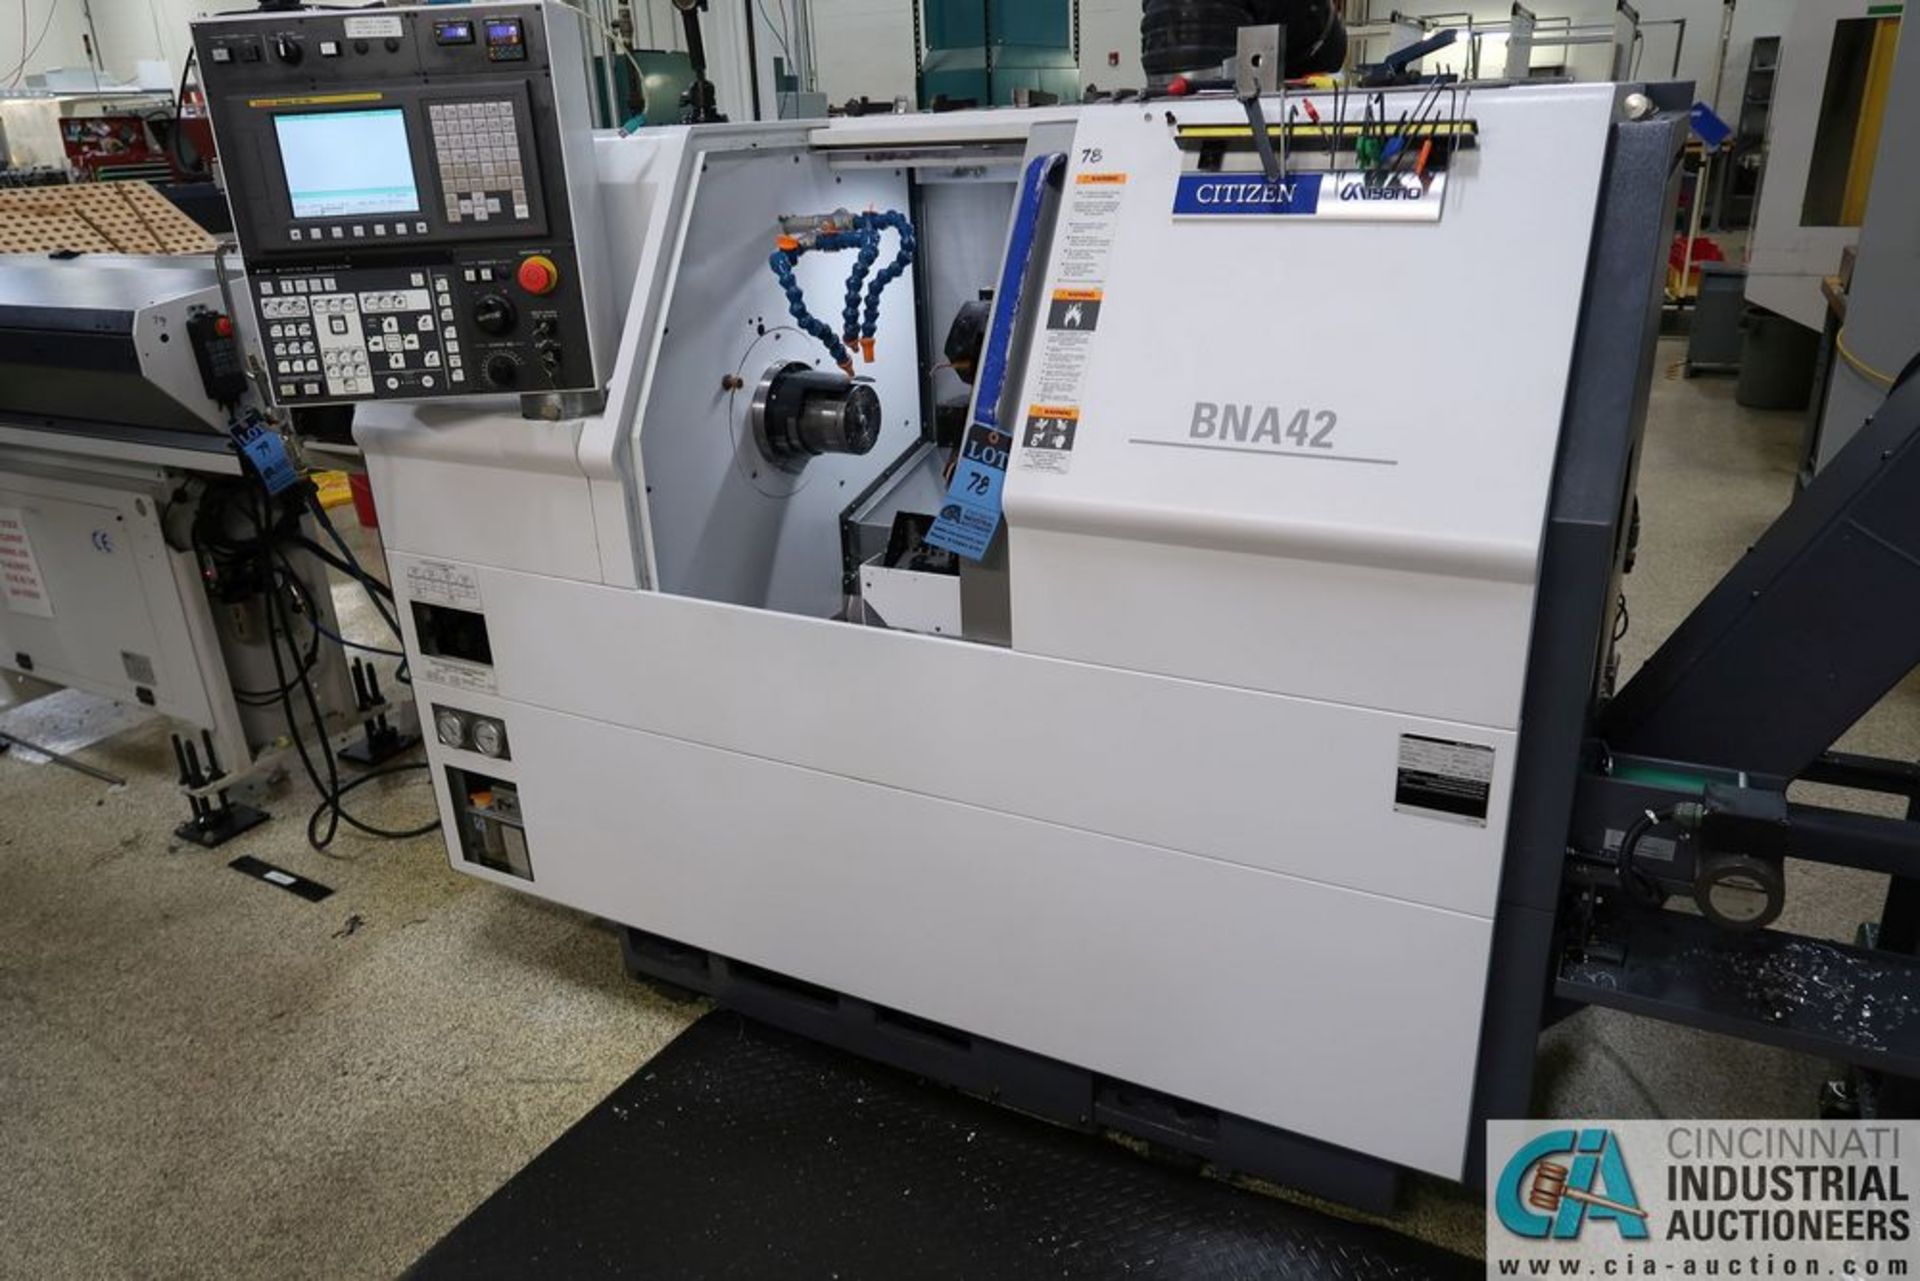 **CITIZEN MIYANO BNA-42S2 FIVE-AXIS CNC LATHE** Sold subject to bid confirmation**